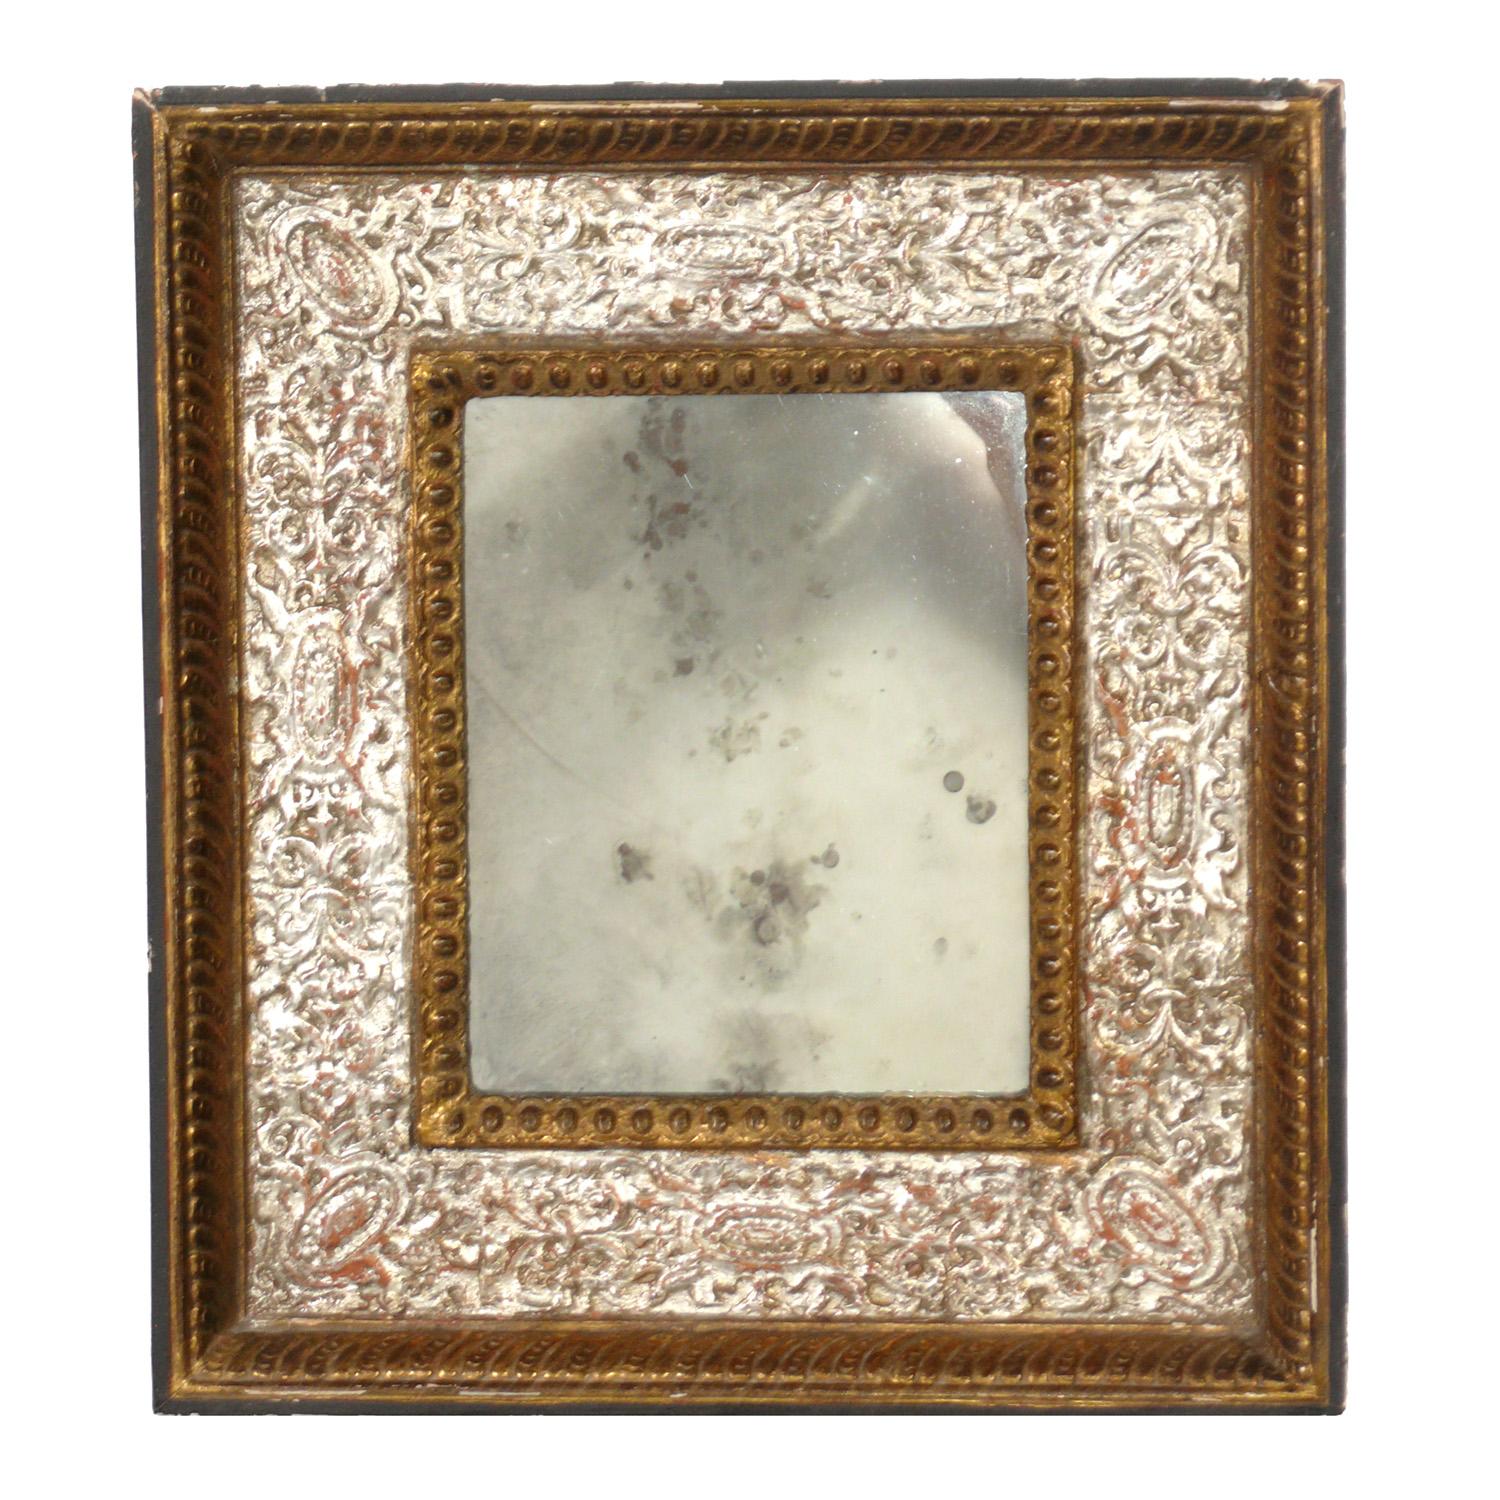 Selection of Petite mirrors, American or Italian, circa 1950s. From left to right, as seen in the first photo, they are: 
1) Gilt ornate antiqued mirror. It measures 18.5